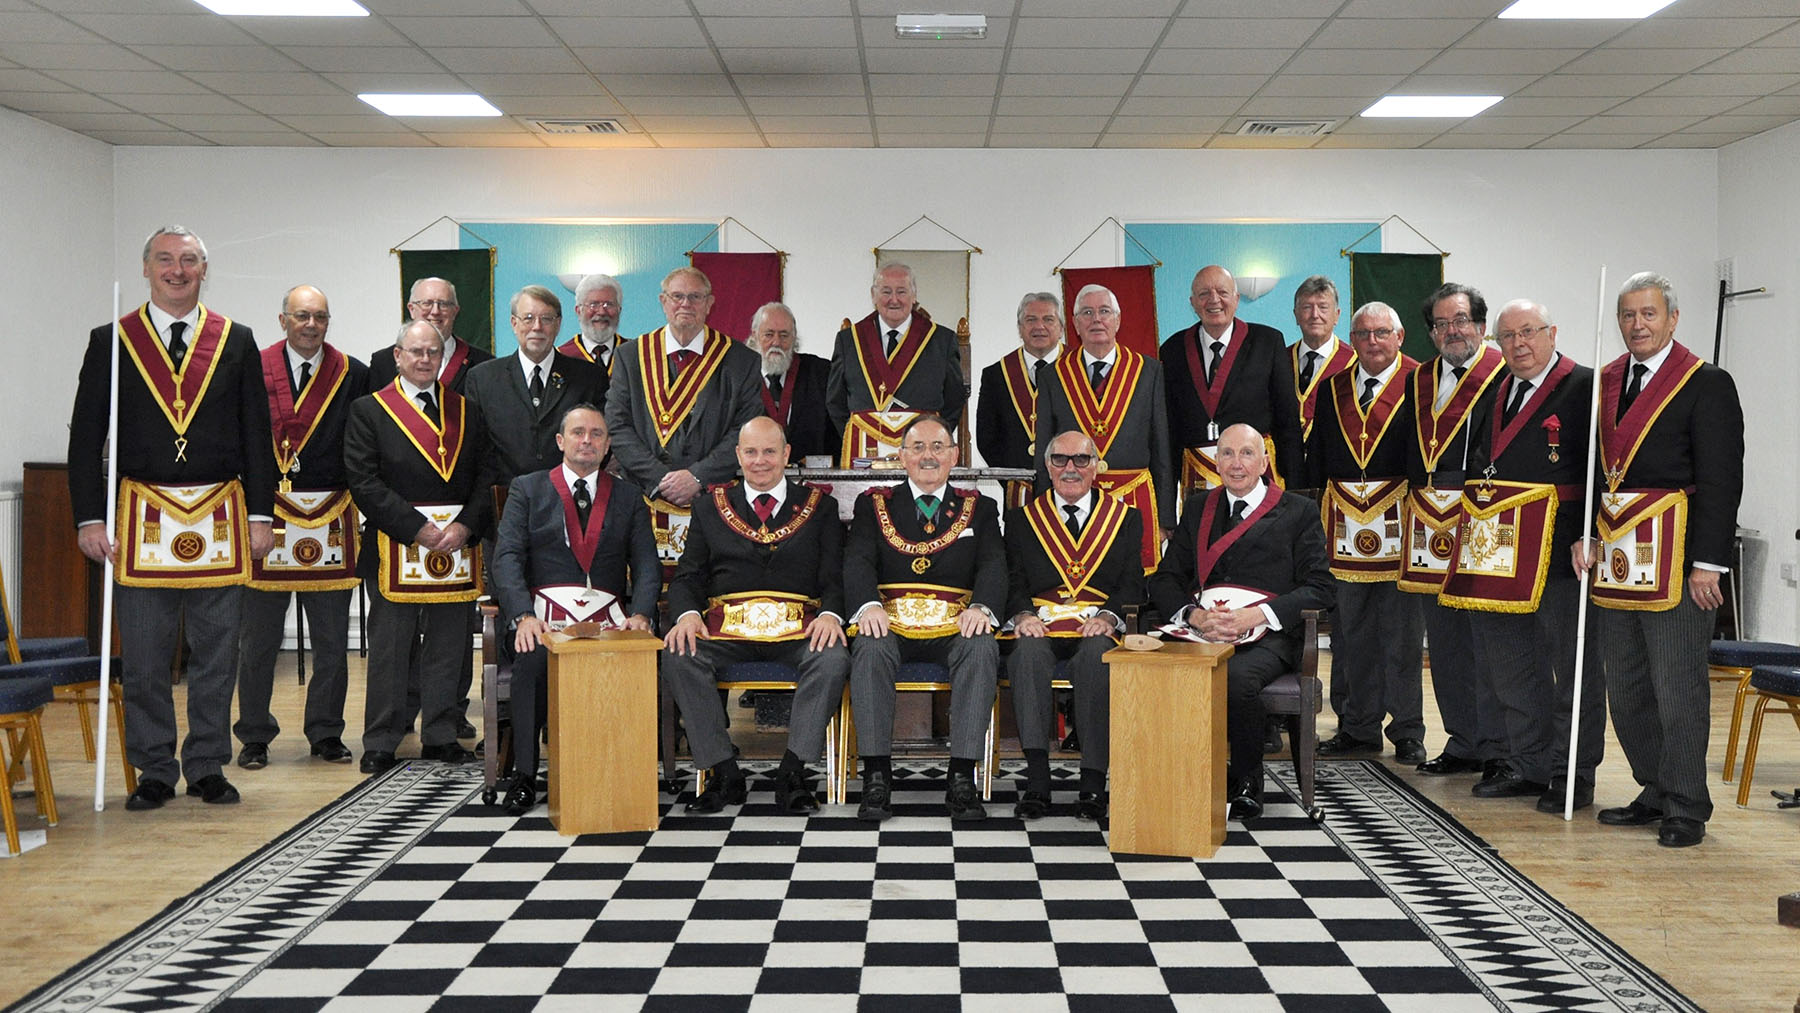 Provincial Grand Master’s visit to Sword of Constantine Court